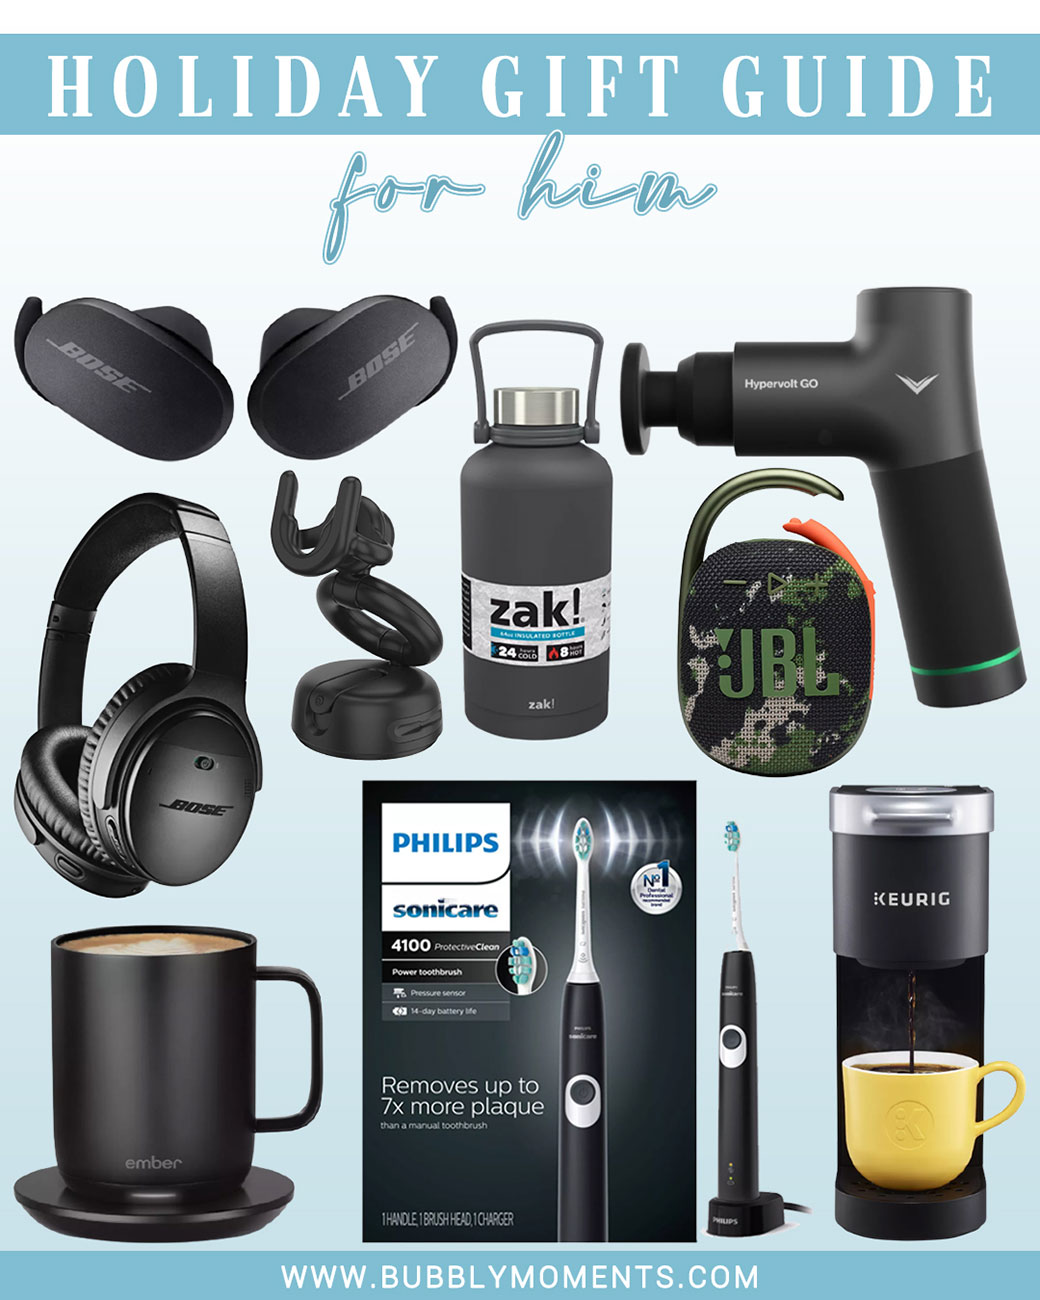 Gifts for him | Christmas gifts for men | Gifts for men | Gift ideas for men | Best gifts for men | Shiatsu Elite Foot Massager | Mini Single-Serve K-Cup Pod Coffee Maker | Percussion Massage Device | Bowflex SelectTech Dumbbell | Bose Noise Cancelling Wireless Earbuds | Smokeless Indoor Grill | Philips Sonicare Rechargeable Electric Toothbrush | Stainless Steel Growler | 16x32 Binocular | Temperature Control Smart Mug | Bubbly Moments